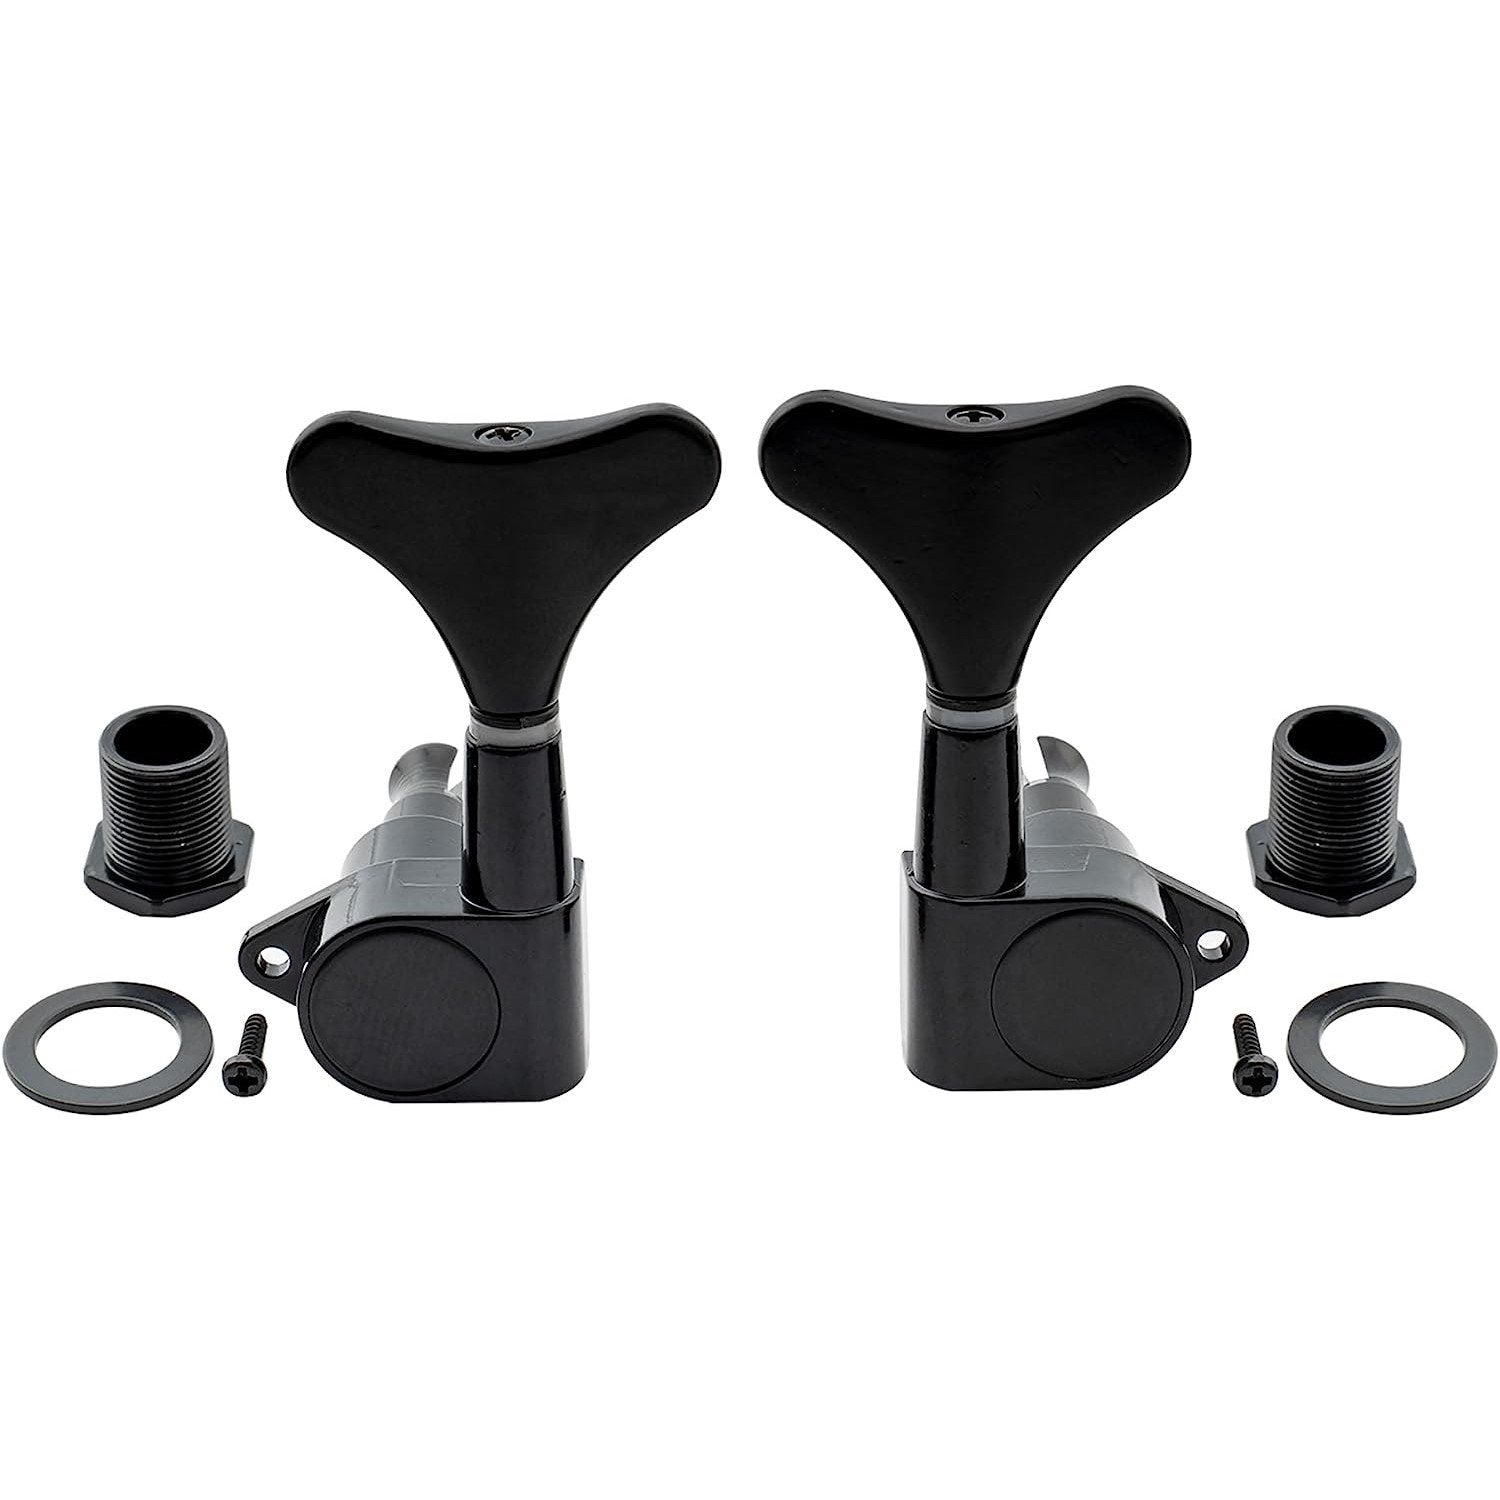 5-String Sealed 2L3R Bass Tuning Pegs, Black